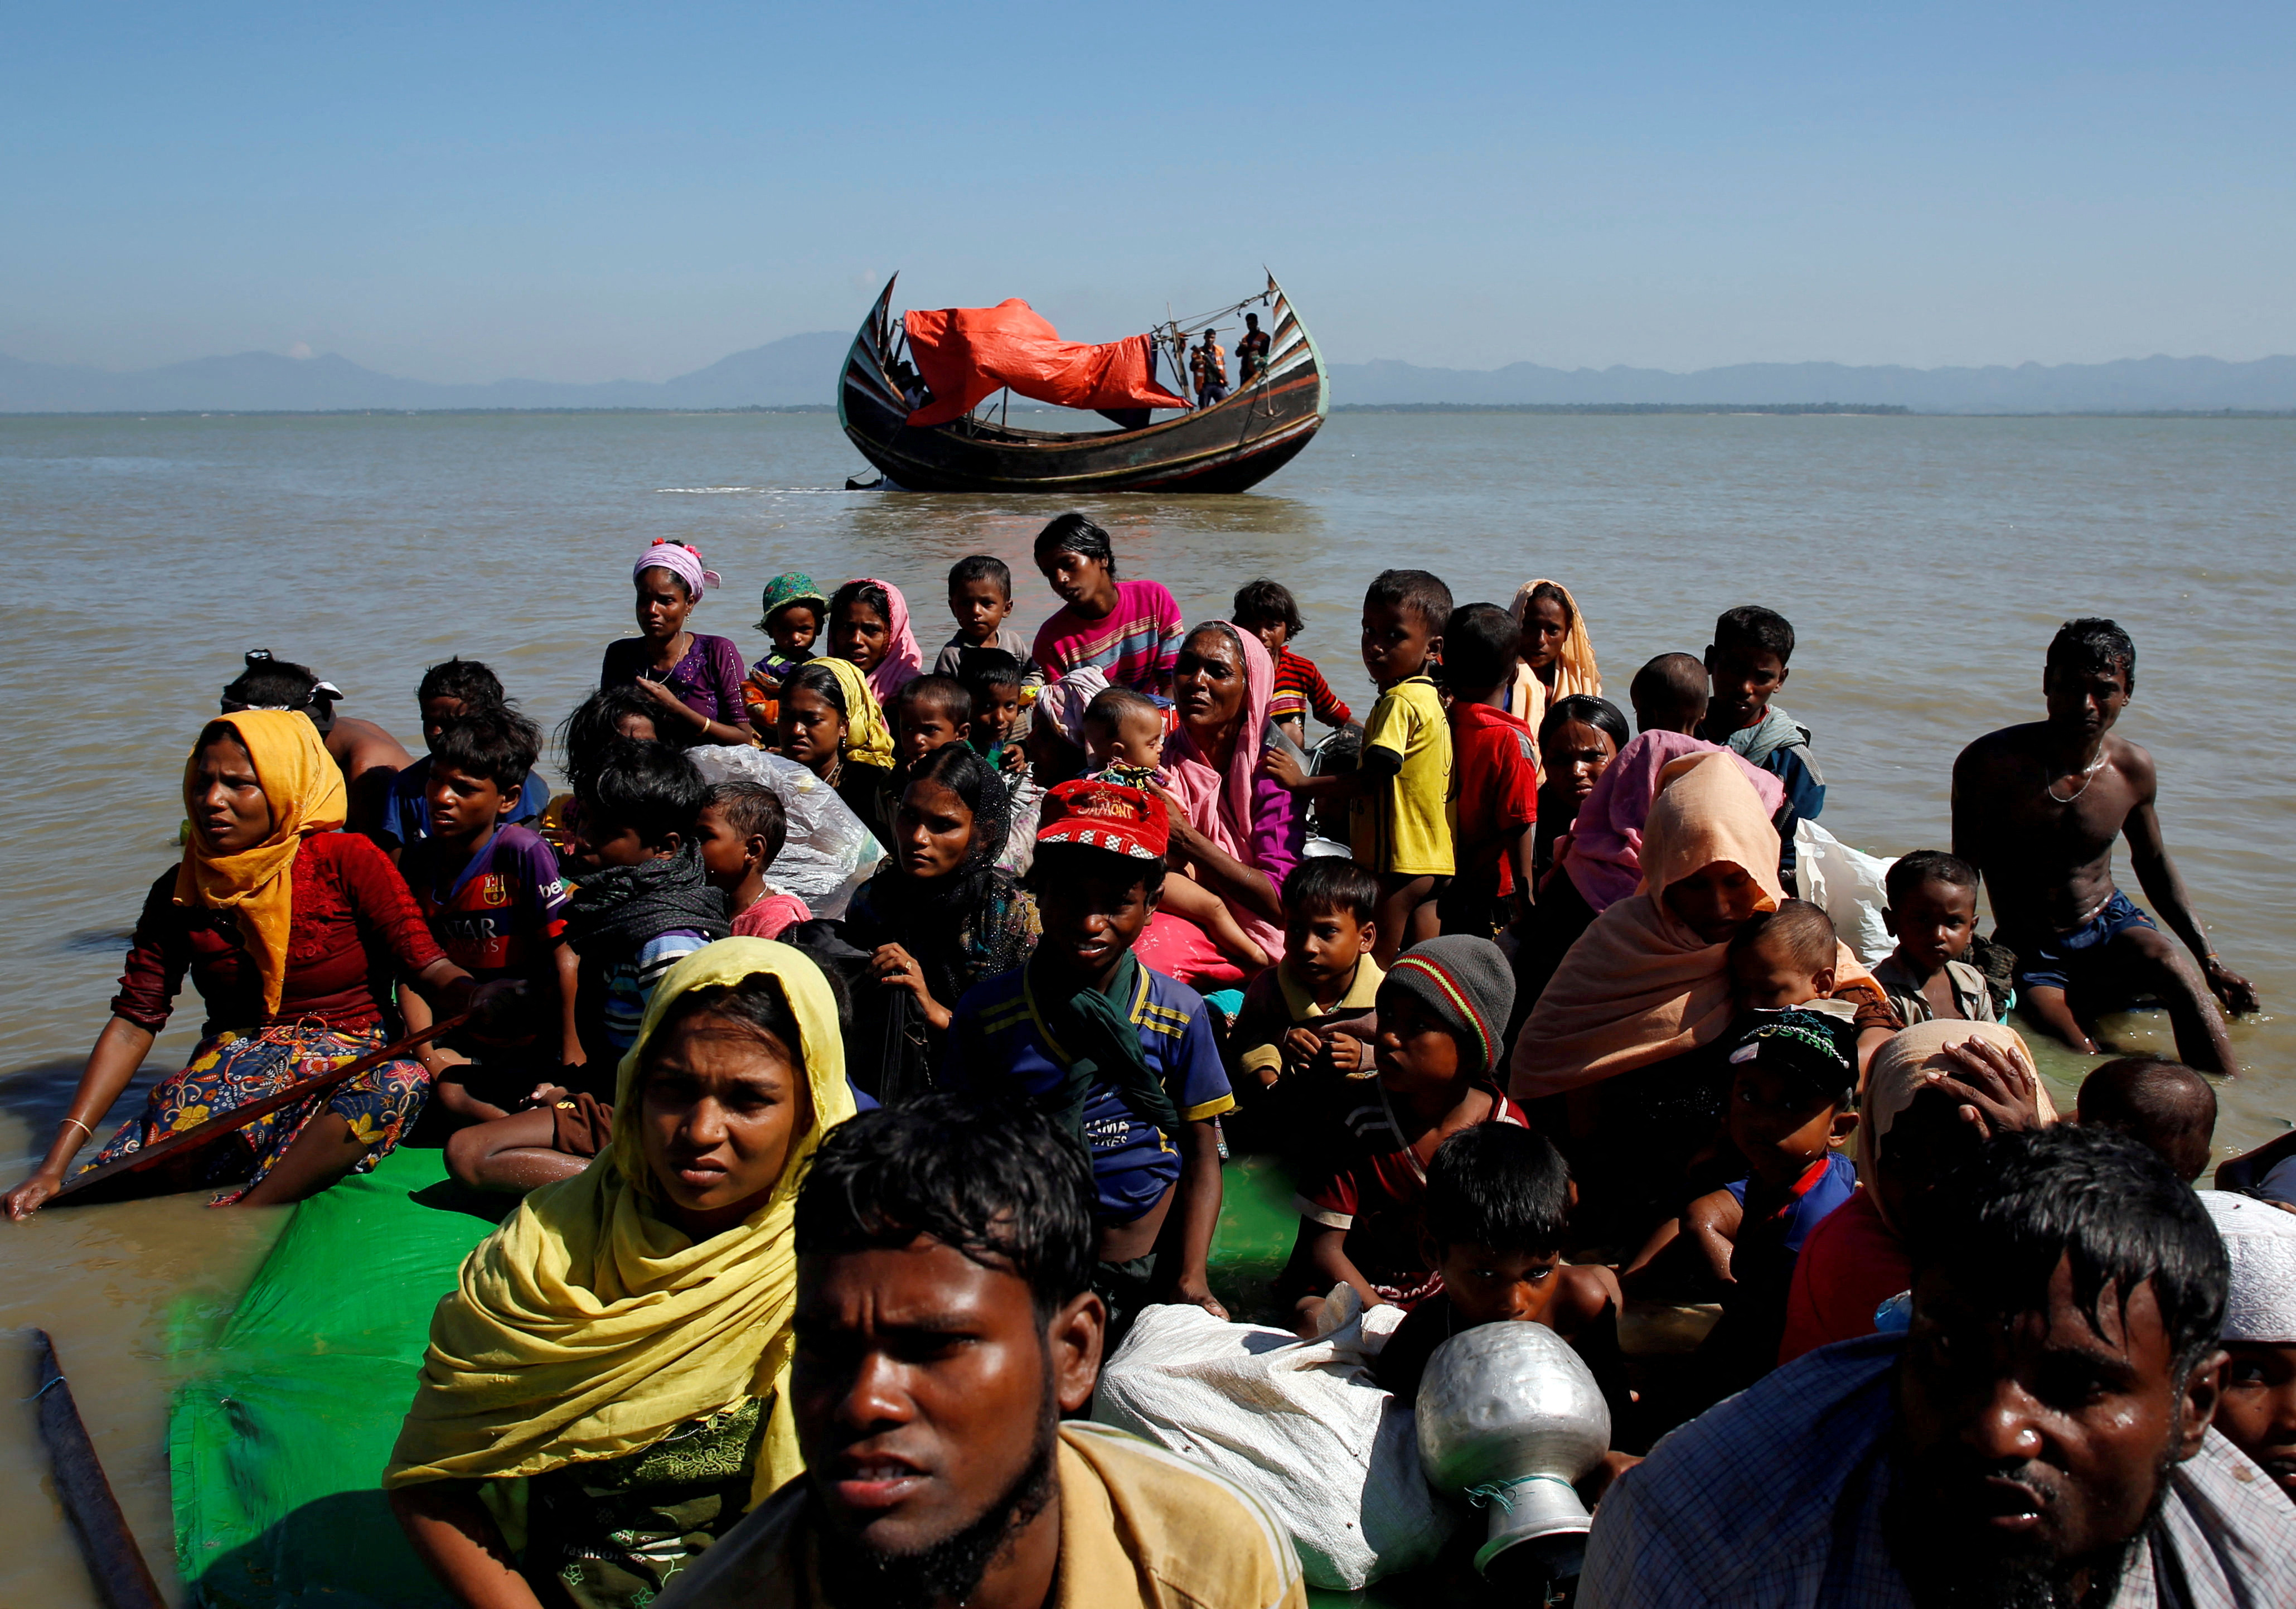 Rohingya refugees sit on a makeshift boat as they get interrogated by the Border Guard Bangladesh after crossing the Bangladesh-Myanmar border, at Shah Porir Dwip near Cox's Bazar